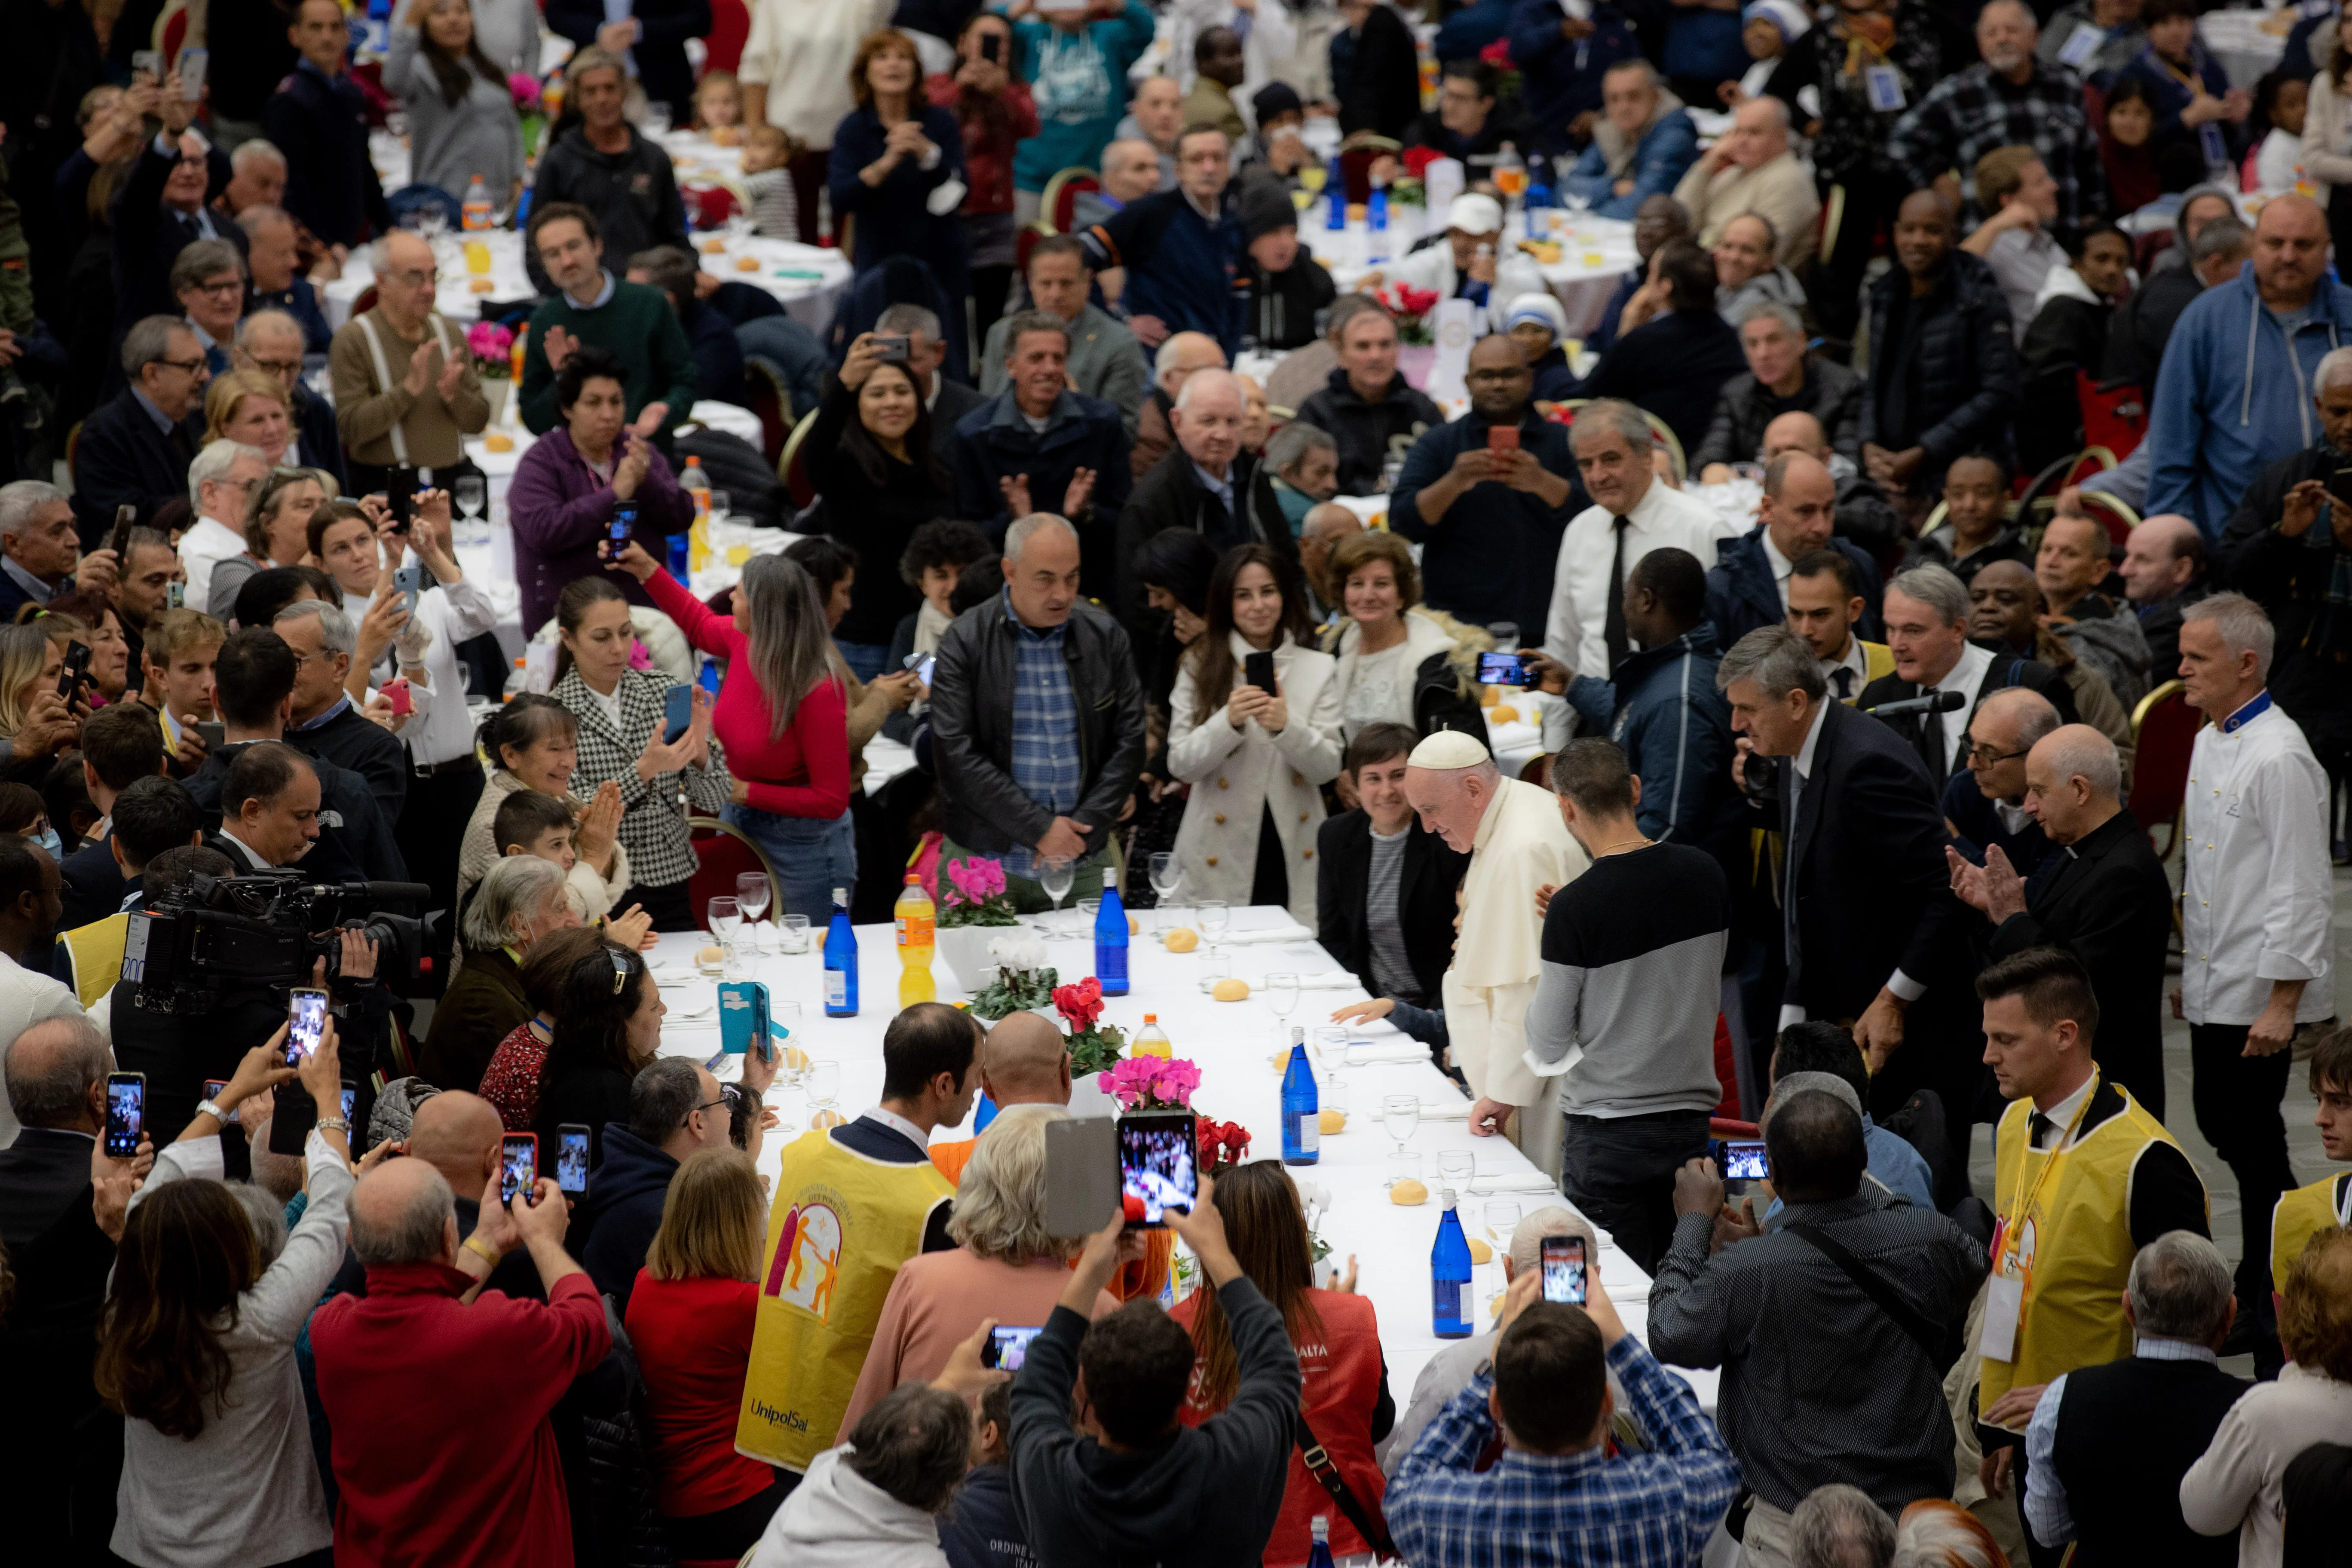 Pope Francis during lunch on the World Day of the Poor Nov. 13, 2022. Daniel Ibáñez / CNA